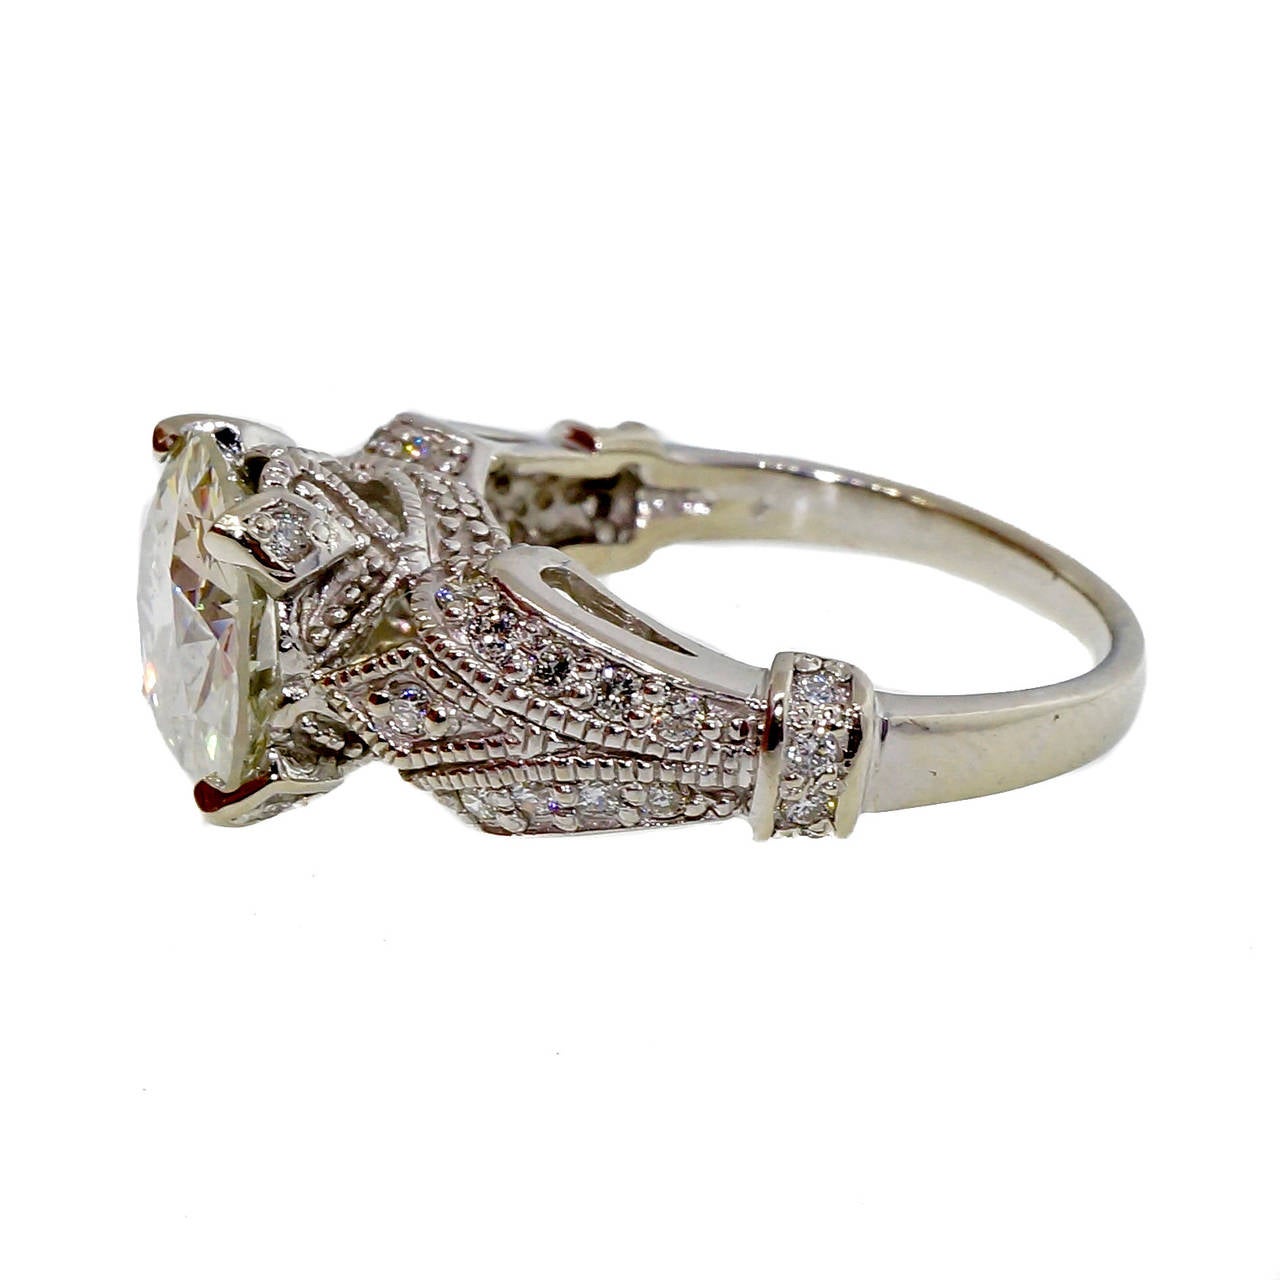 Transitional brilliant cut diamond original ring circa 1940. Cut with extra diameter and sparkle. Very nice crown style vintage setting. Bigger in diameter than most 3.00ct diamonds.

1 transitional cut diamond, approx. total weight 2.76cts, I,